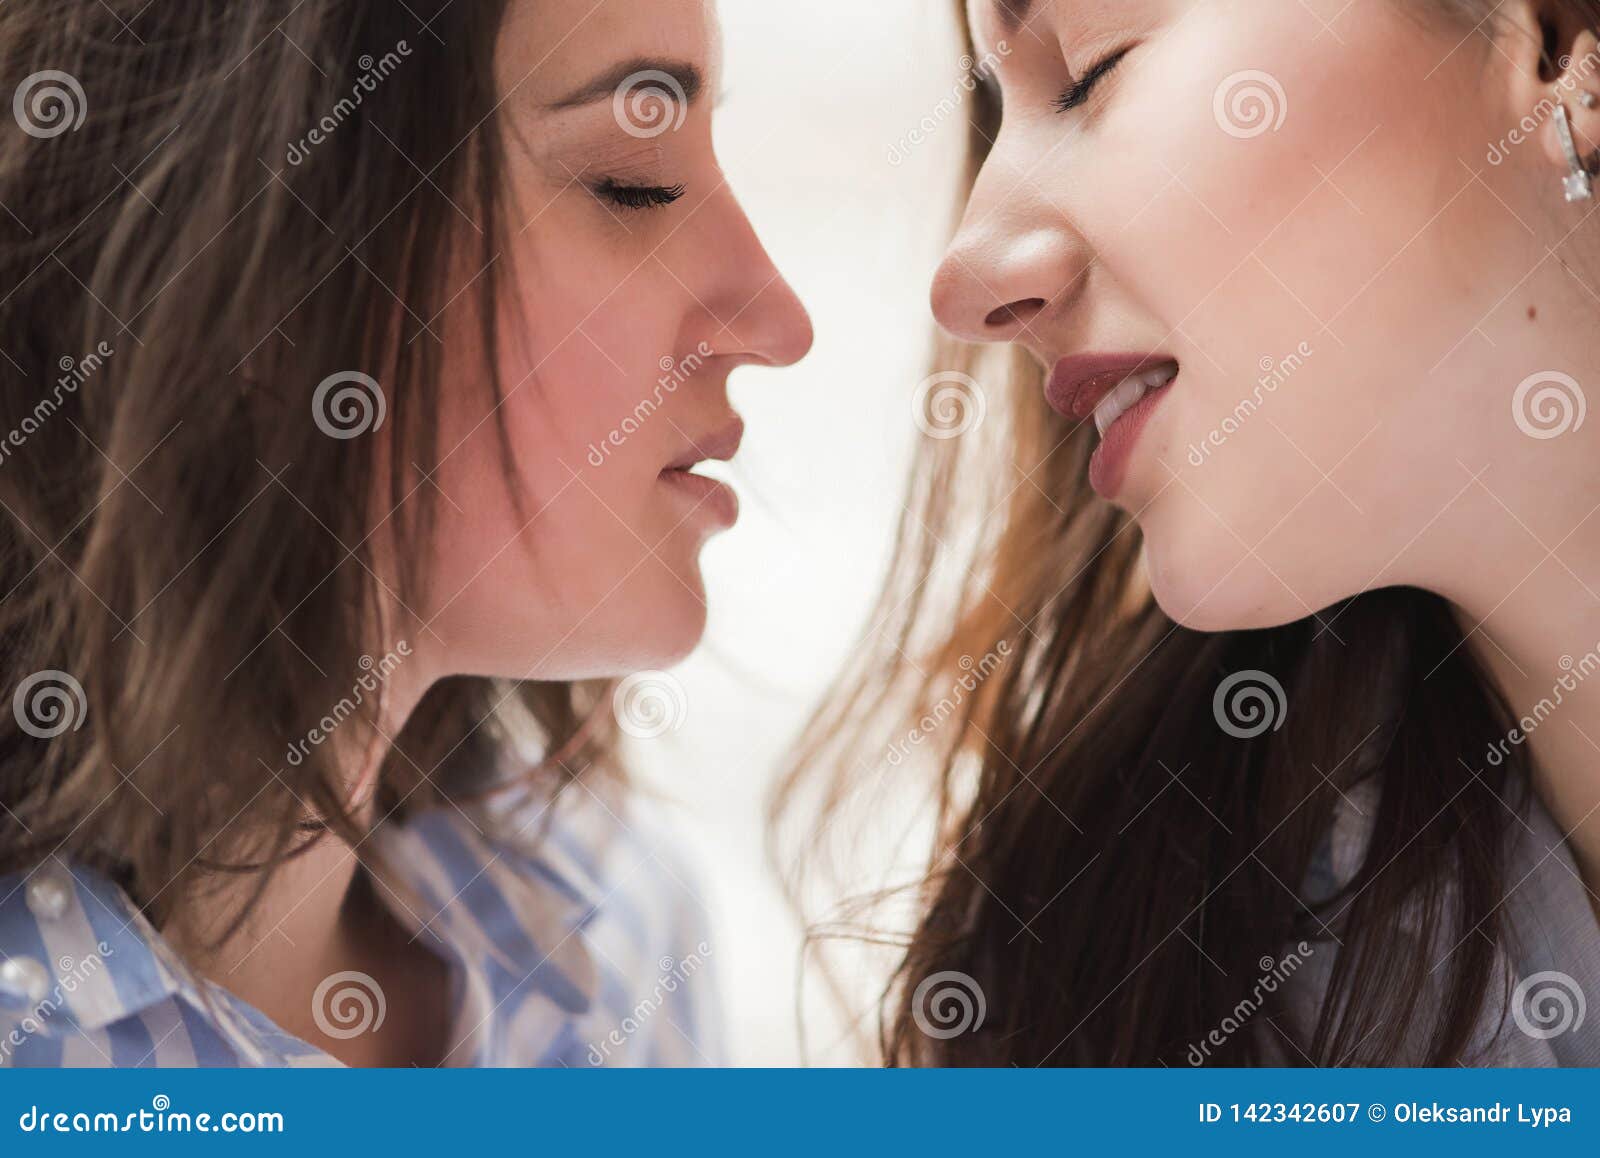 Two Girls Same Sex Going To Kiss, Close-up